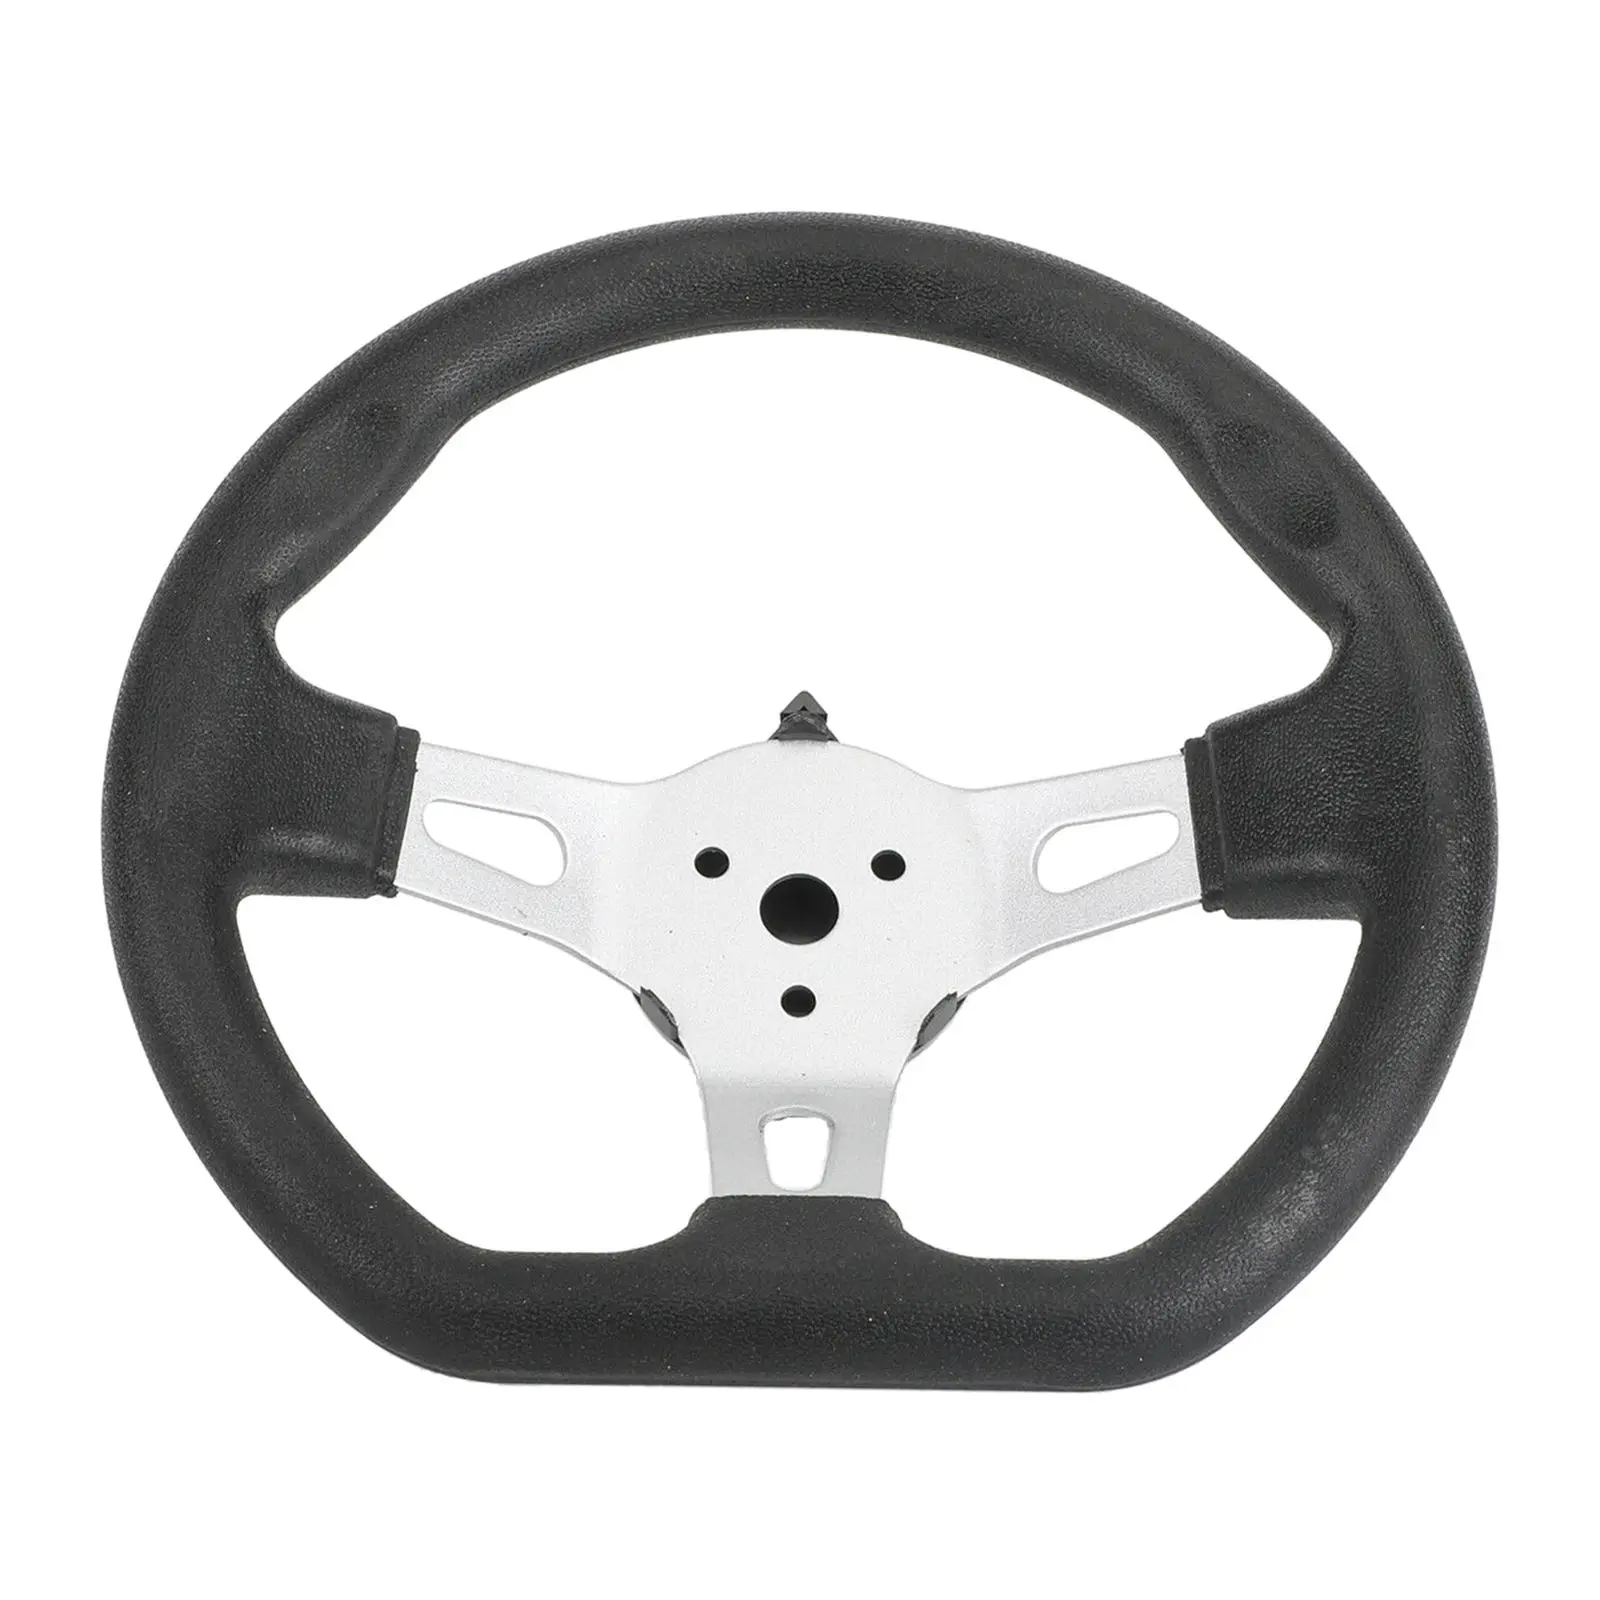 Details about   270mm Go Kart Steering Wheel Kart Parts Replacement For Go-Kart Buggy Accessory 